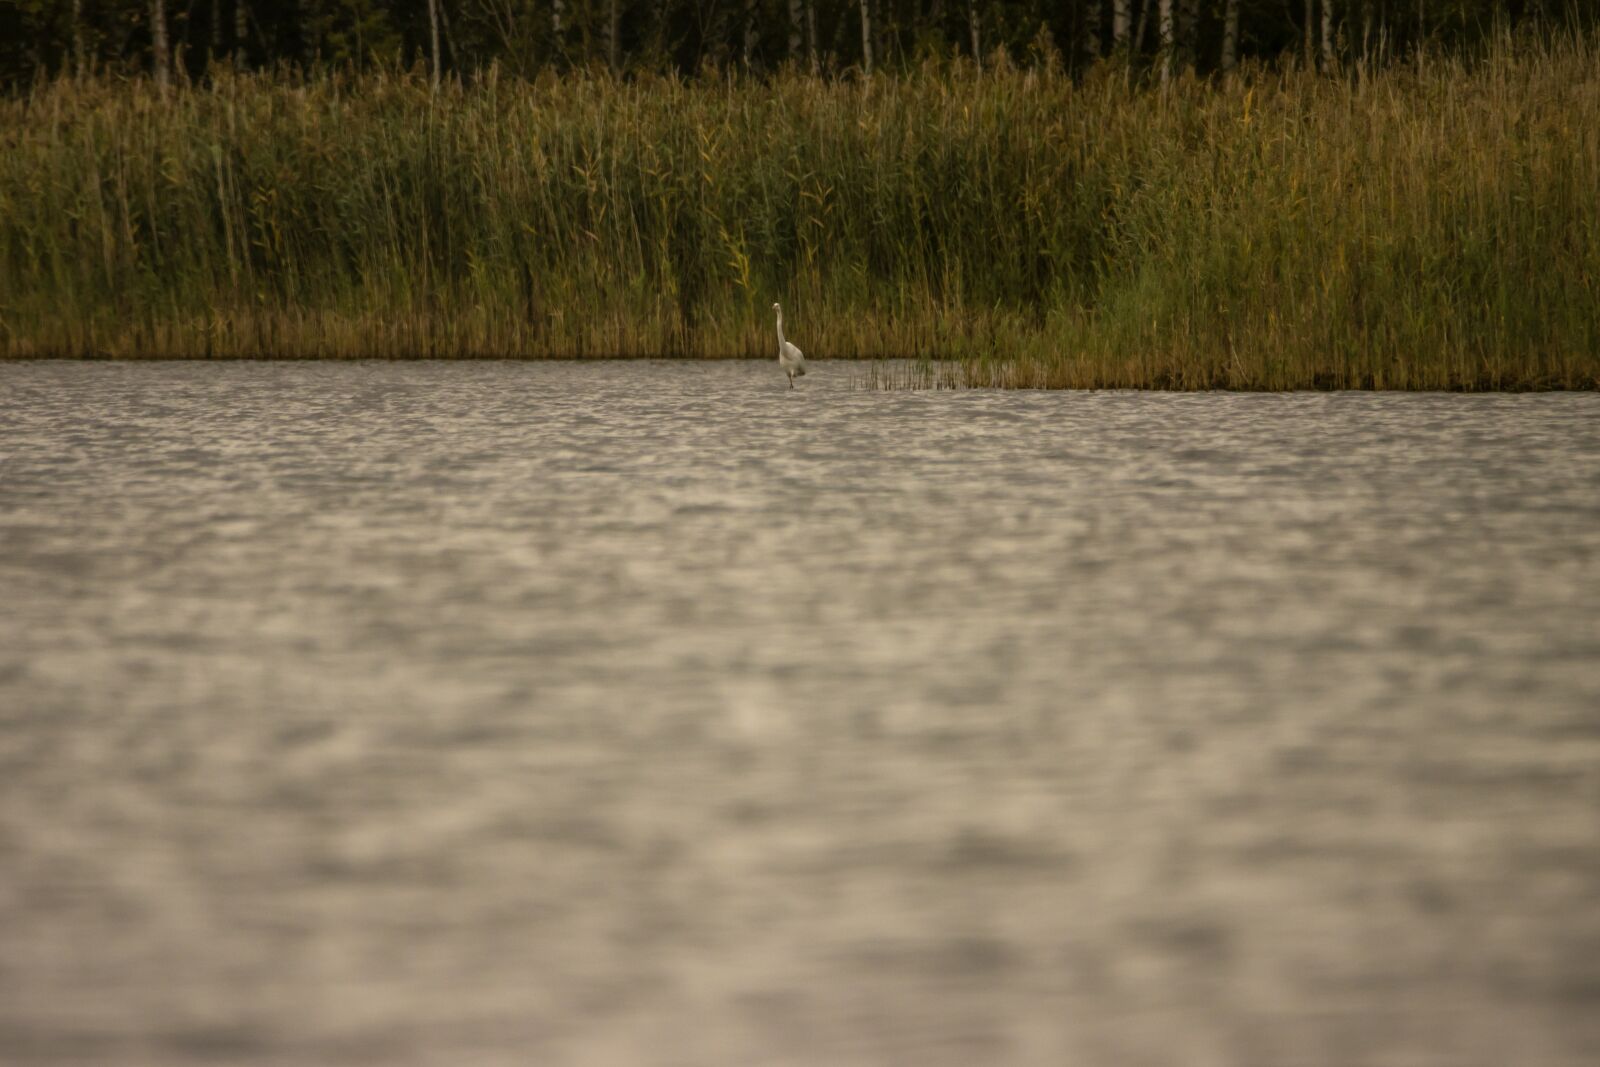 150-600mm F5-6.3 DG OS HSM | Contemporary 015 sample photo. Lake, grass, egret photography